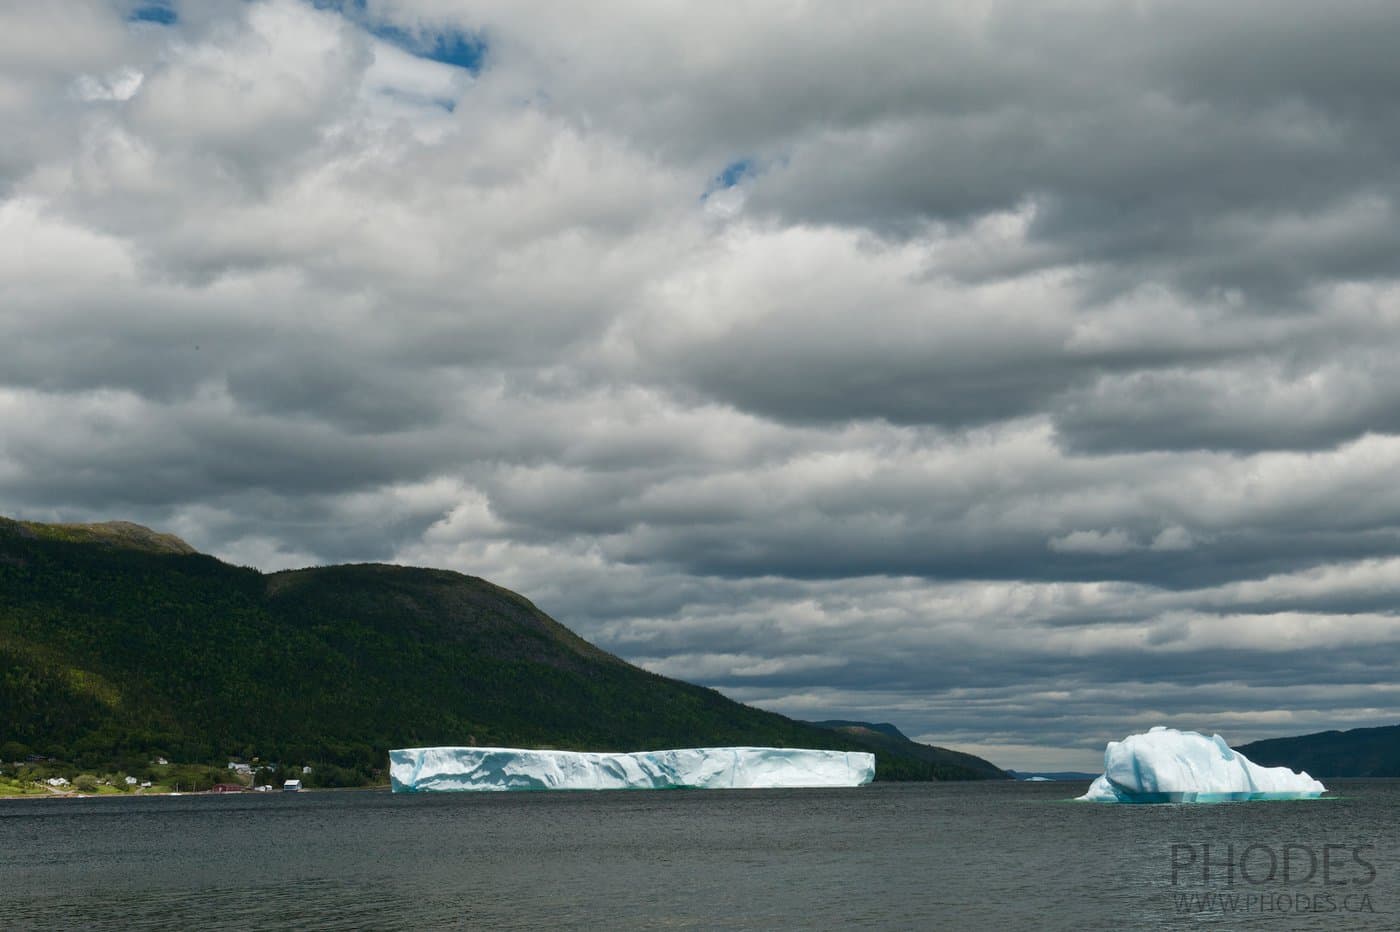 Two icebergs in King’s Point bay - Newfoundland